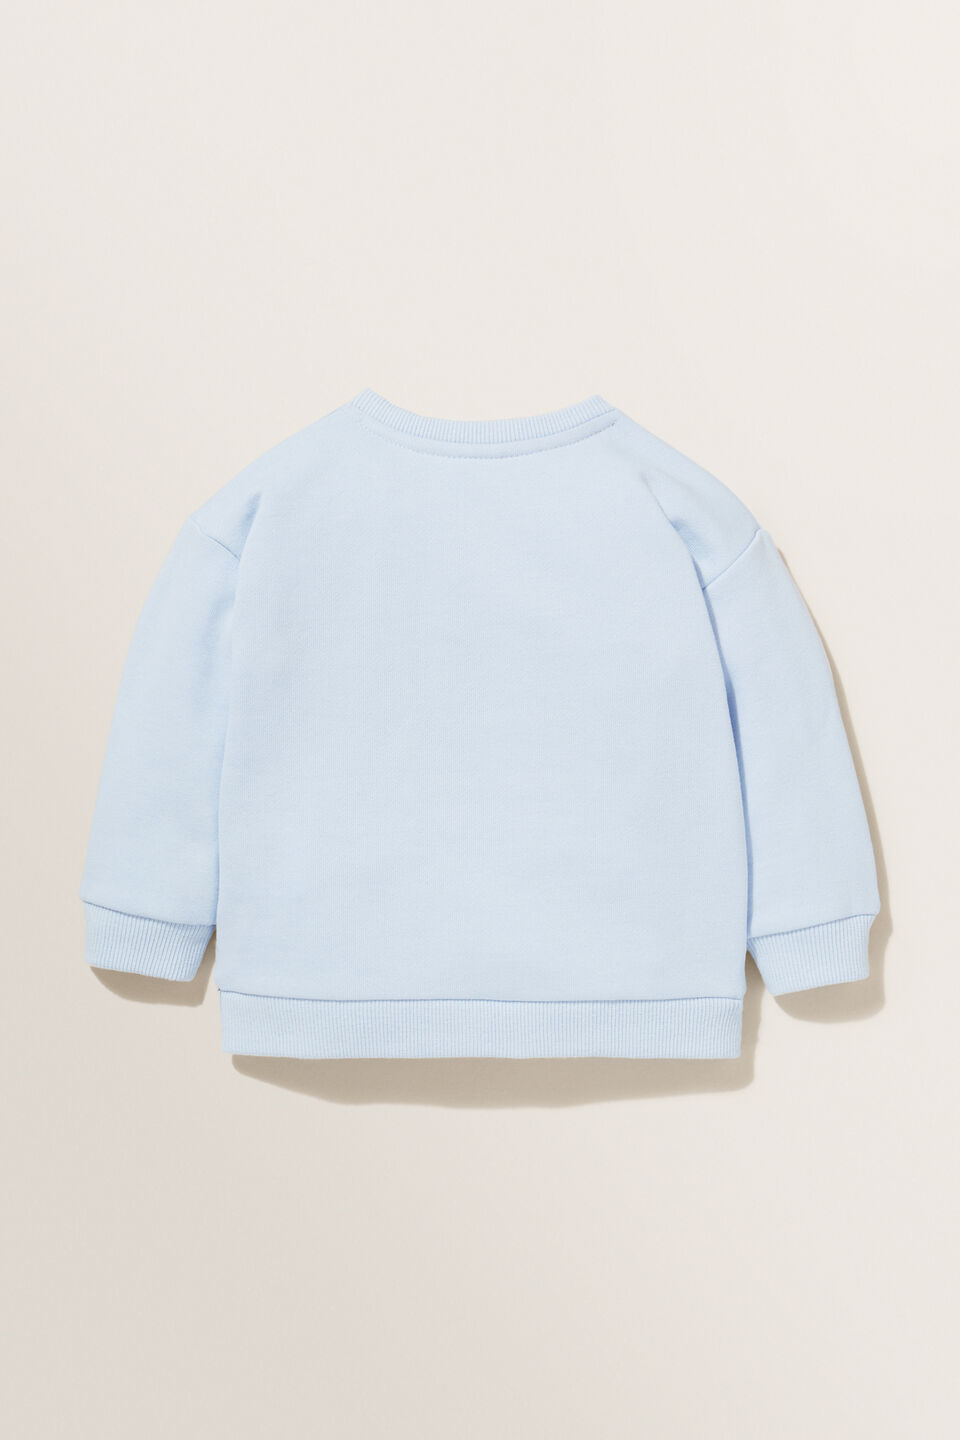 Poodle Sweater  Baby Blue